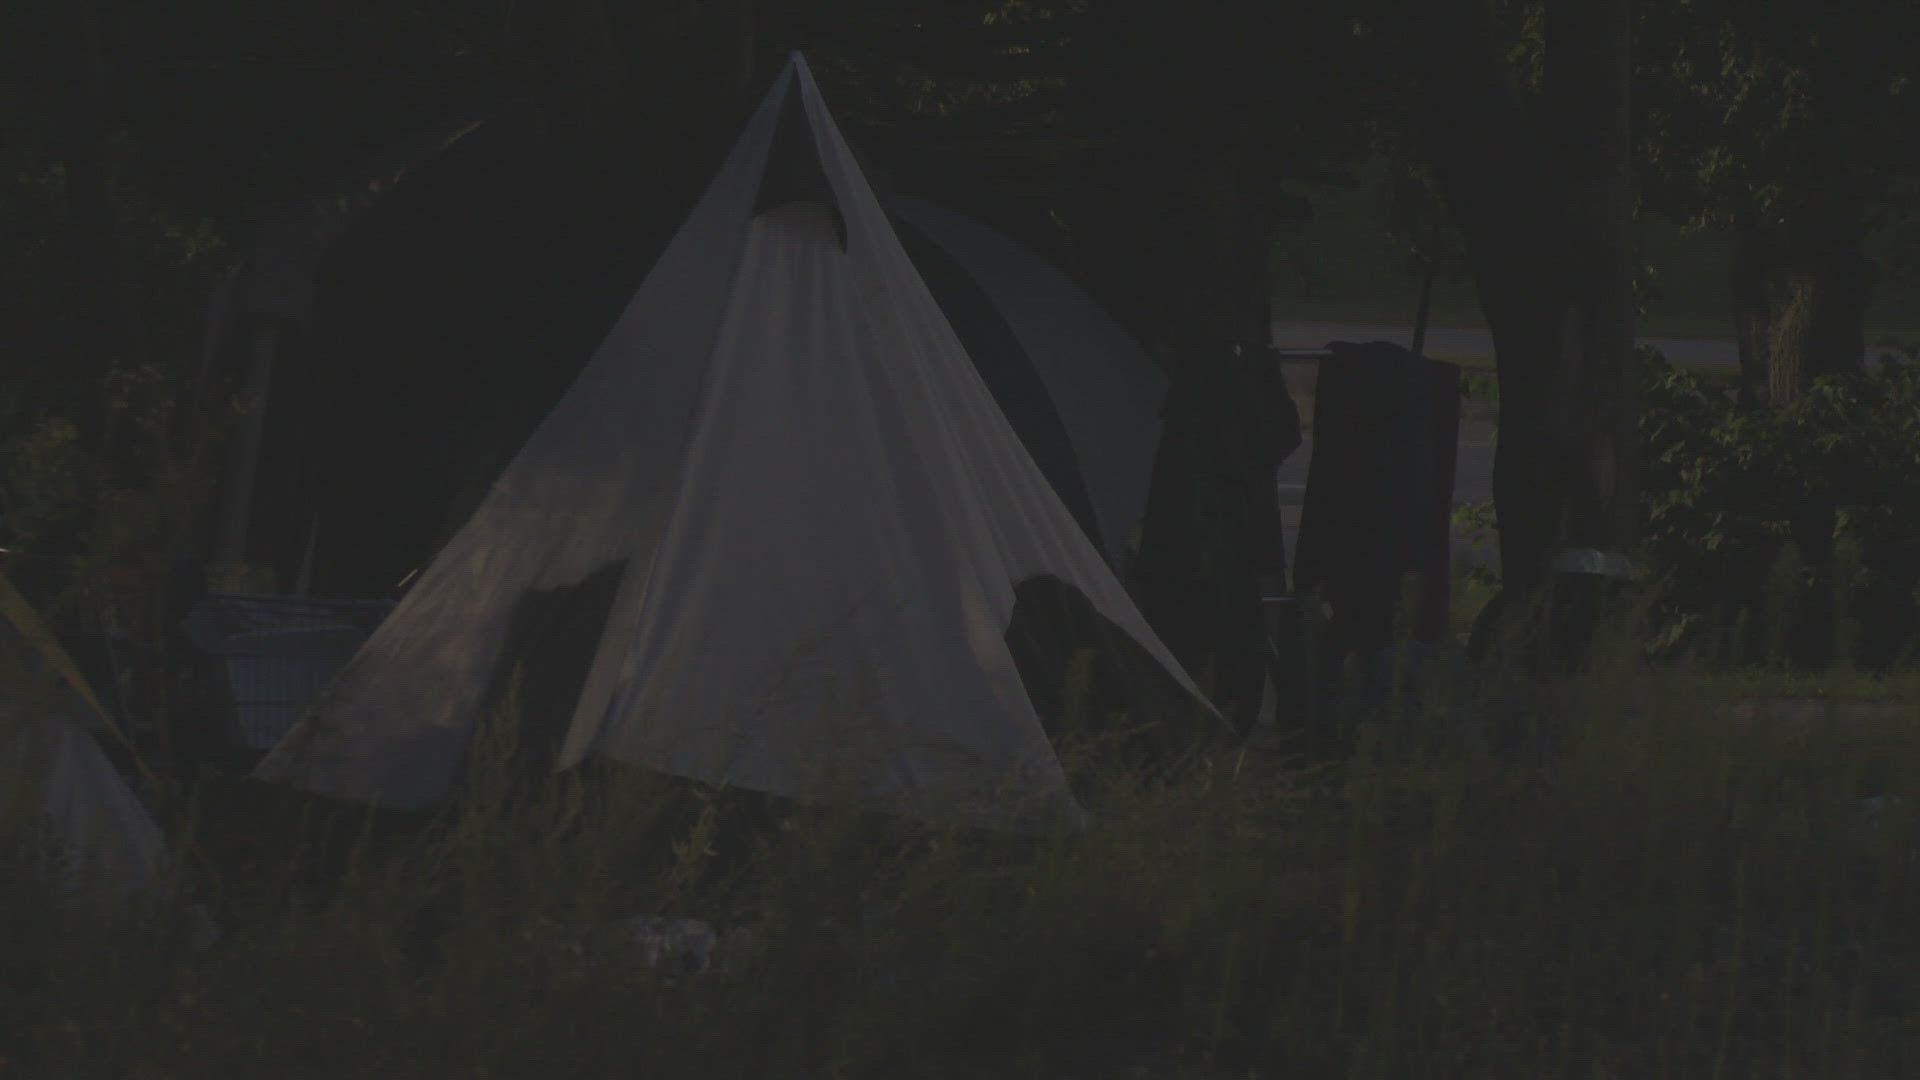 The site made up of dozens of tents is expected to be removed Thursday morning, according to the Maine Department of Transportation.